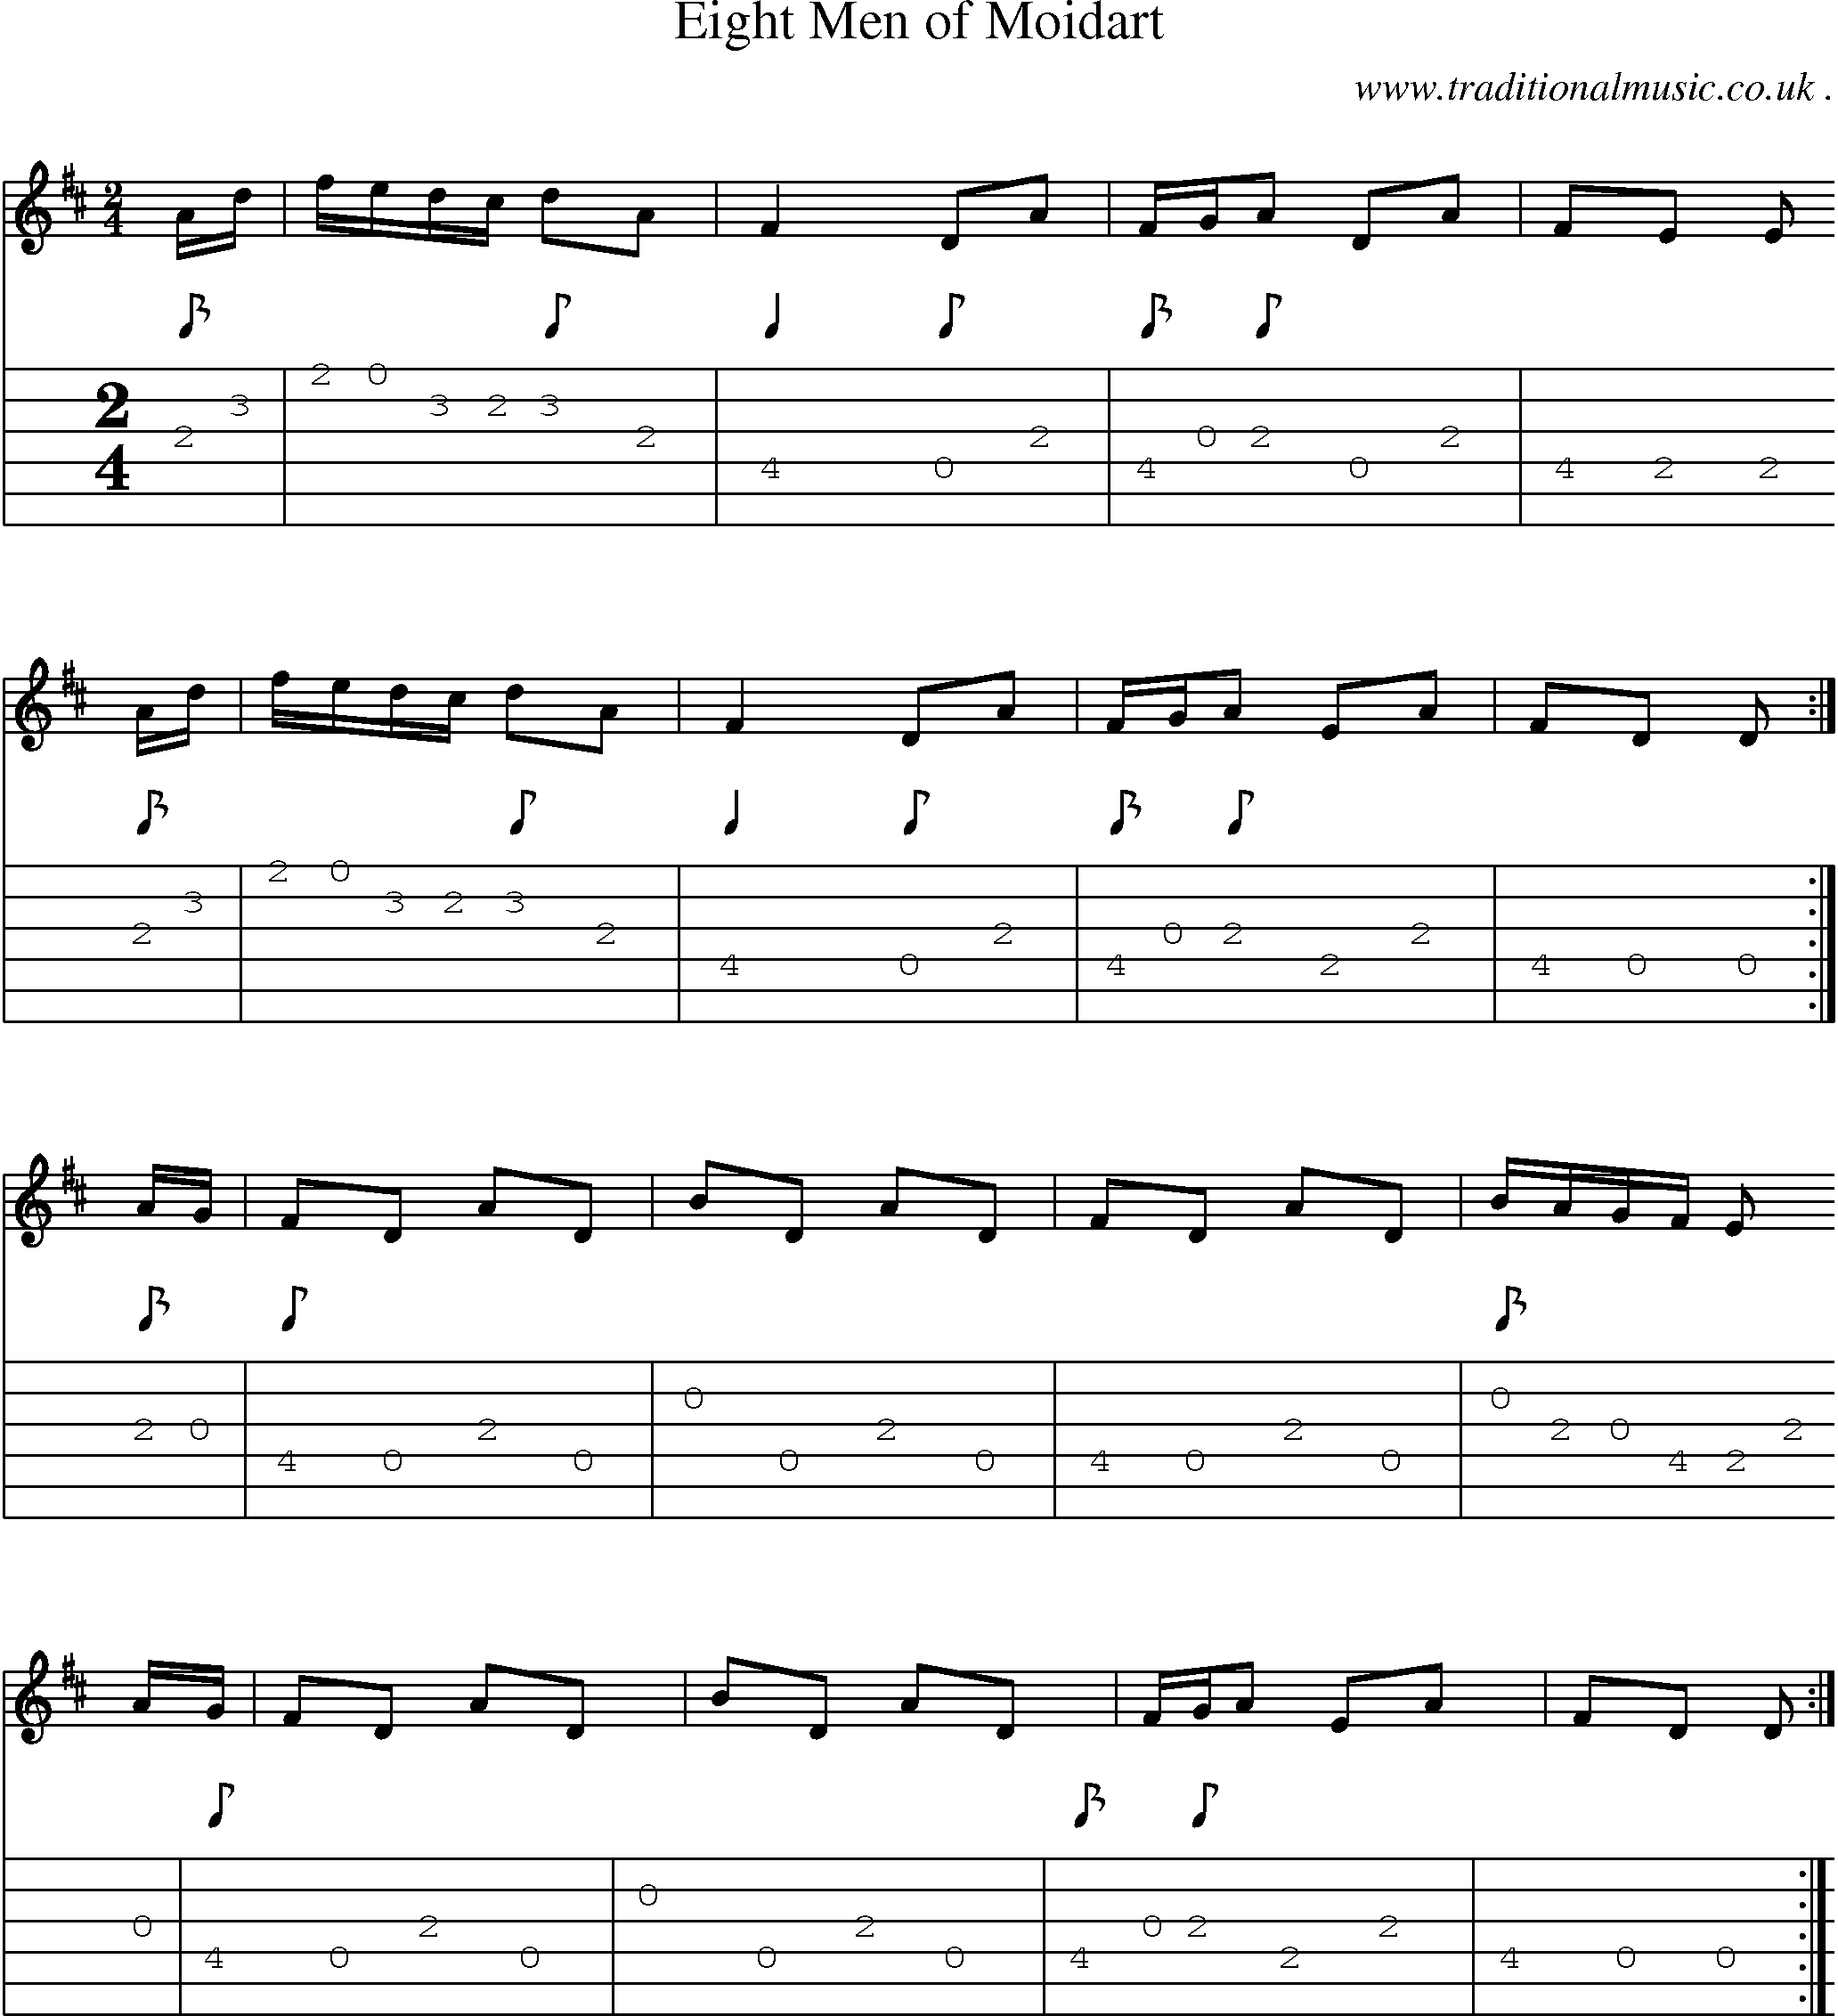 Sheet-music  score, Chords and Guitar Tabs for Eight Men Of Moidart